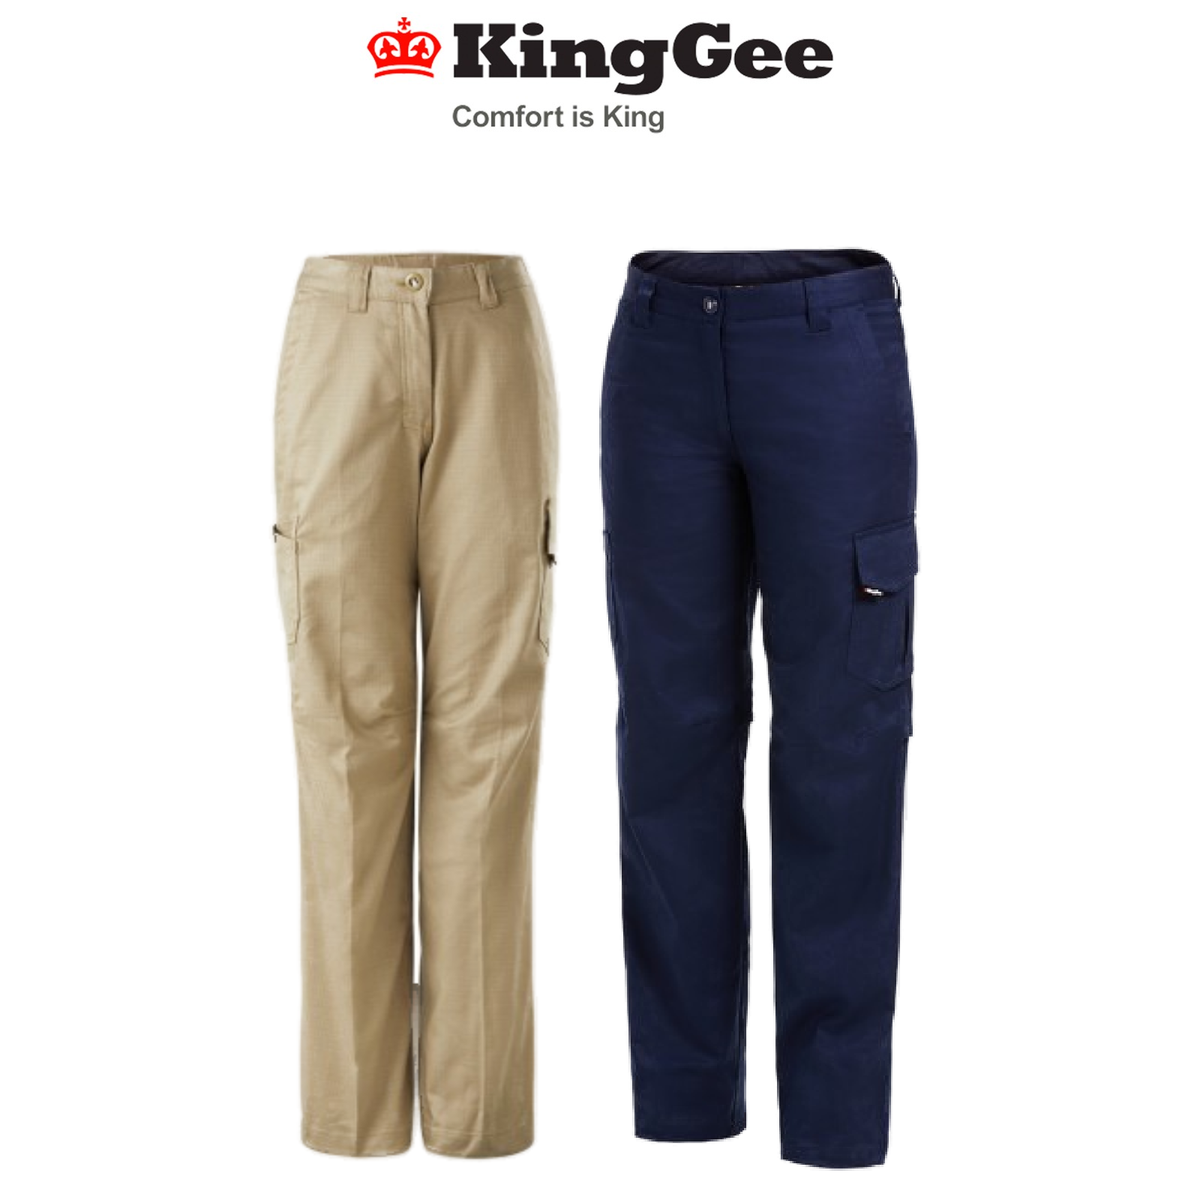 KingGee Womens Workcool 2 Pants Contoured Fit Work Safety Comfy Ripstop K43820